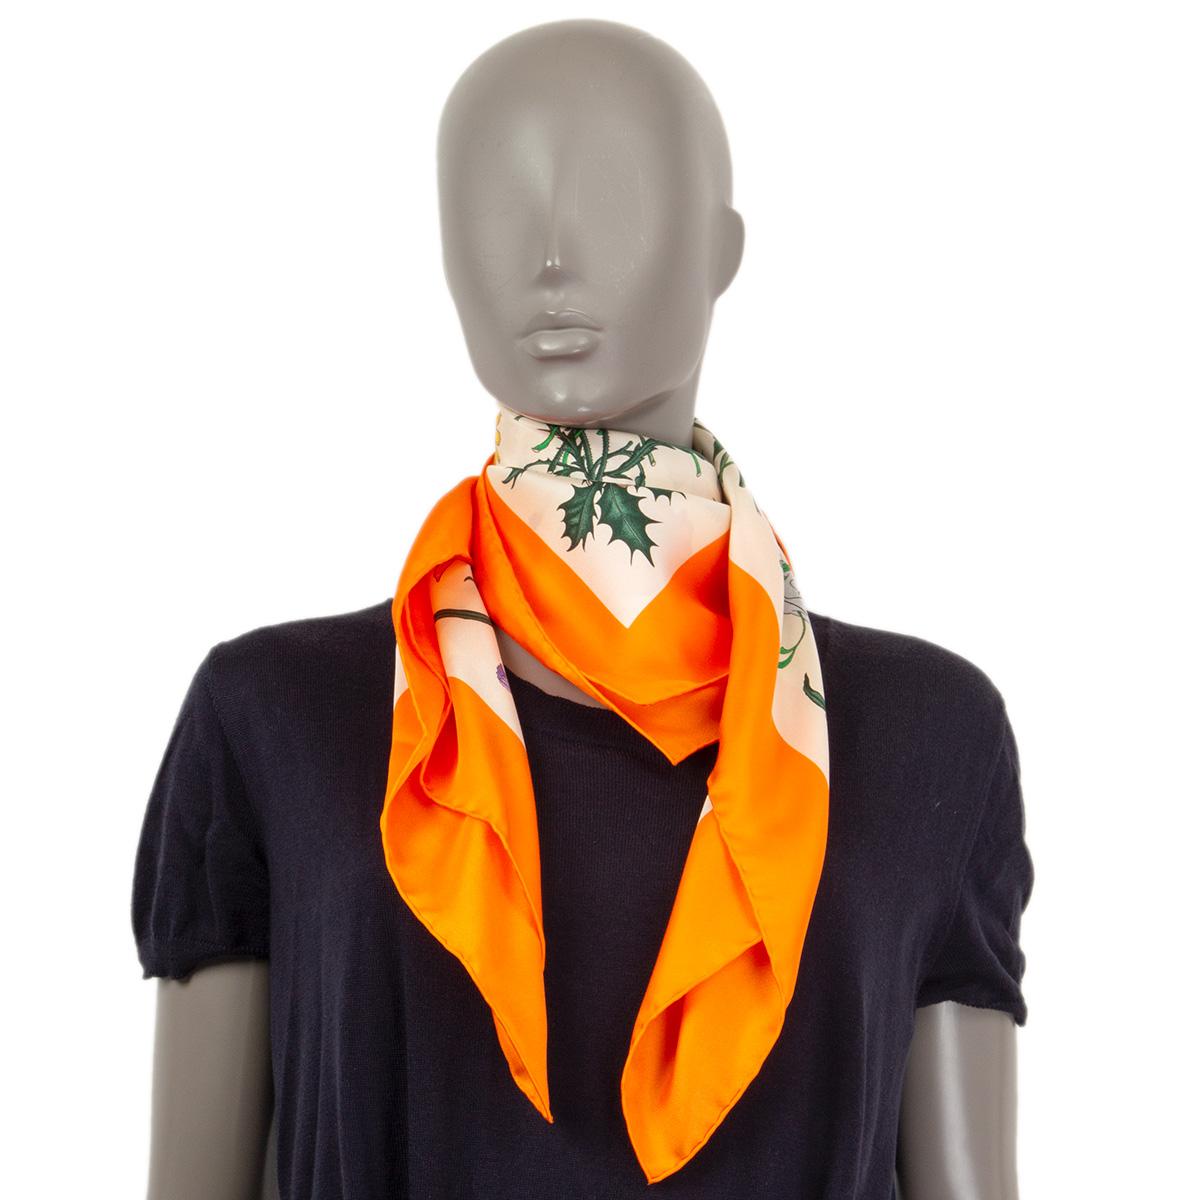 100% authentic  Gucci flora scarf in orange and ivory silk (100%) with a stunning array of colorful flowers. Has been worn and is in excellent condition. 

Measurements
Width	90cm (35.1in)
Length	90cm (35.1in)

All our listings include only the